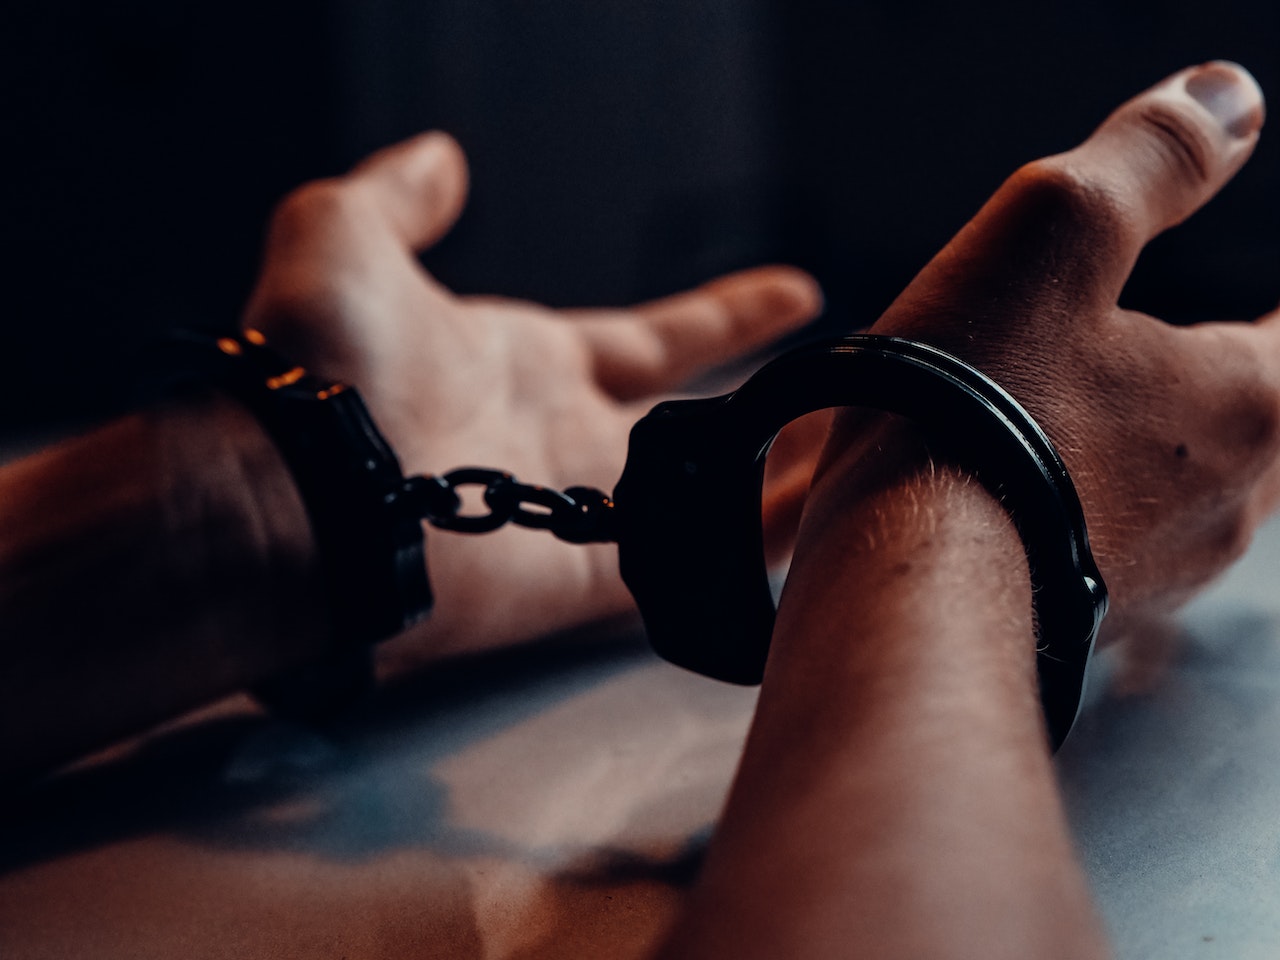 A Person's Hands on the Table Wearing Handcuffs